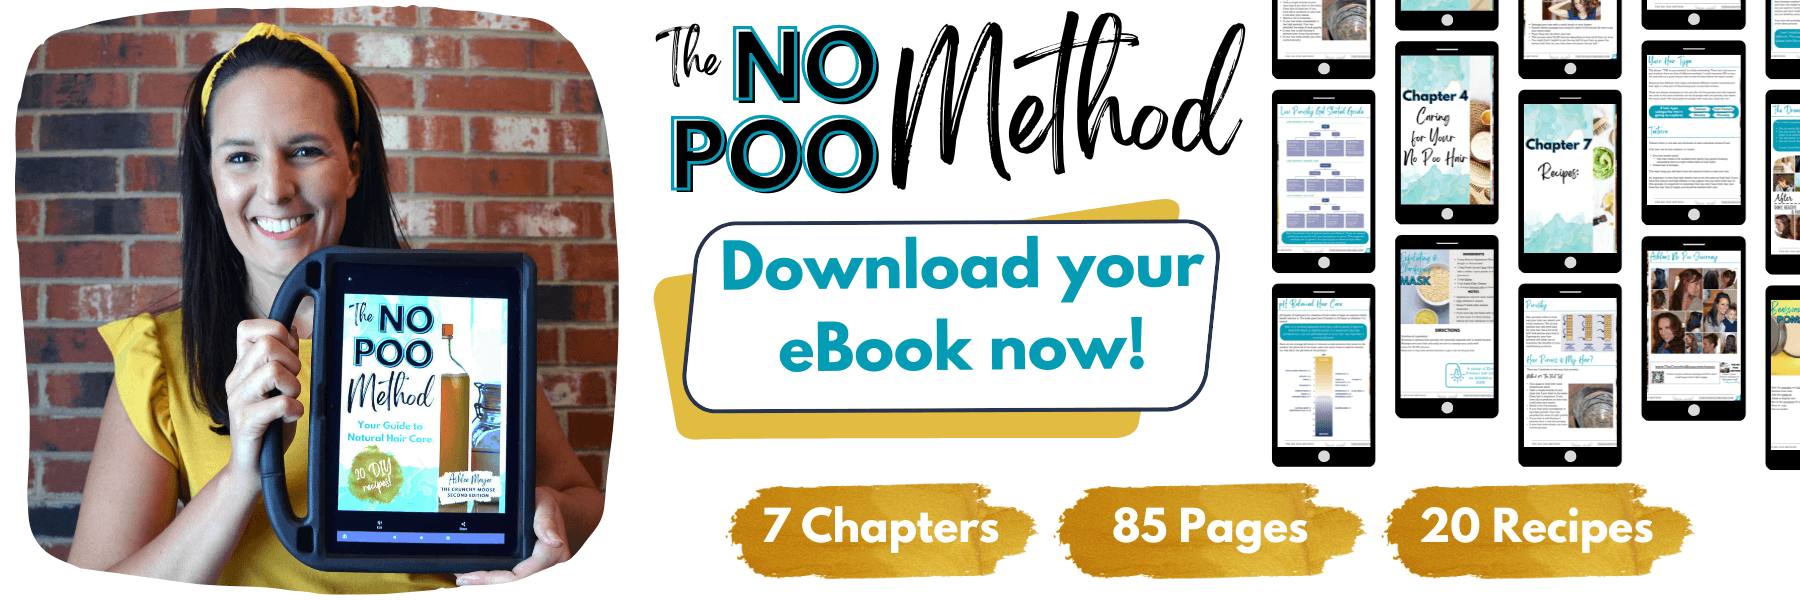 The No Poo Method by Ashlee Mayer of The Crunchy Moose